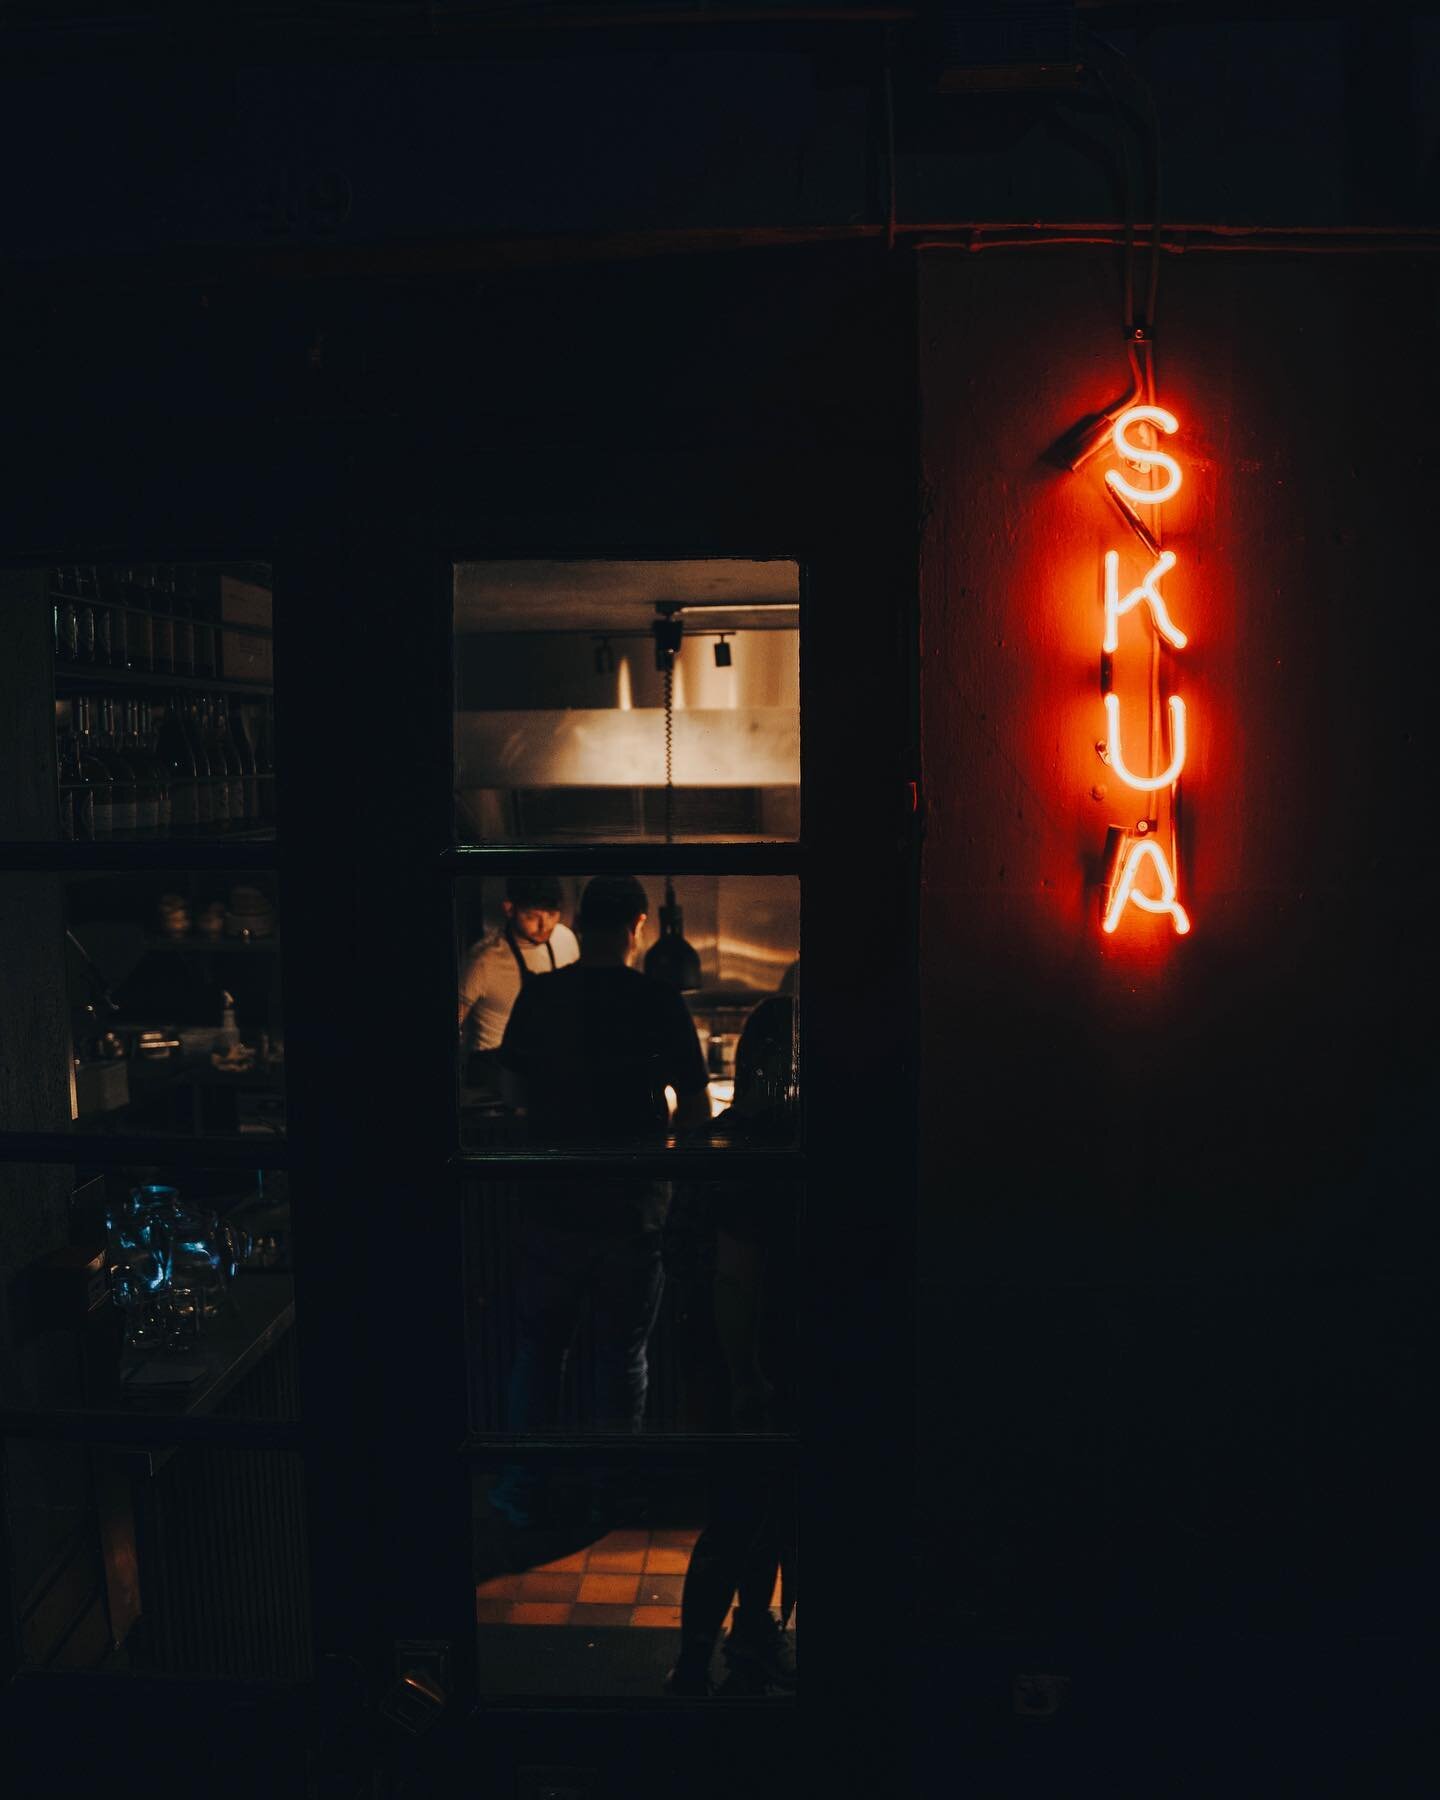 🕊️ S K U A 🕊️
.
Enter the undisputed Champion - clear Glass, Neon fill. @skua.scot went for the best (in our humble option) neon option of all time. Classy, classic and dripping with that oh so sweet hazy glow 🚨🚨.
.
These shots really capture the